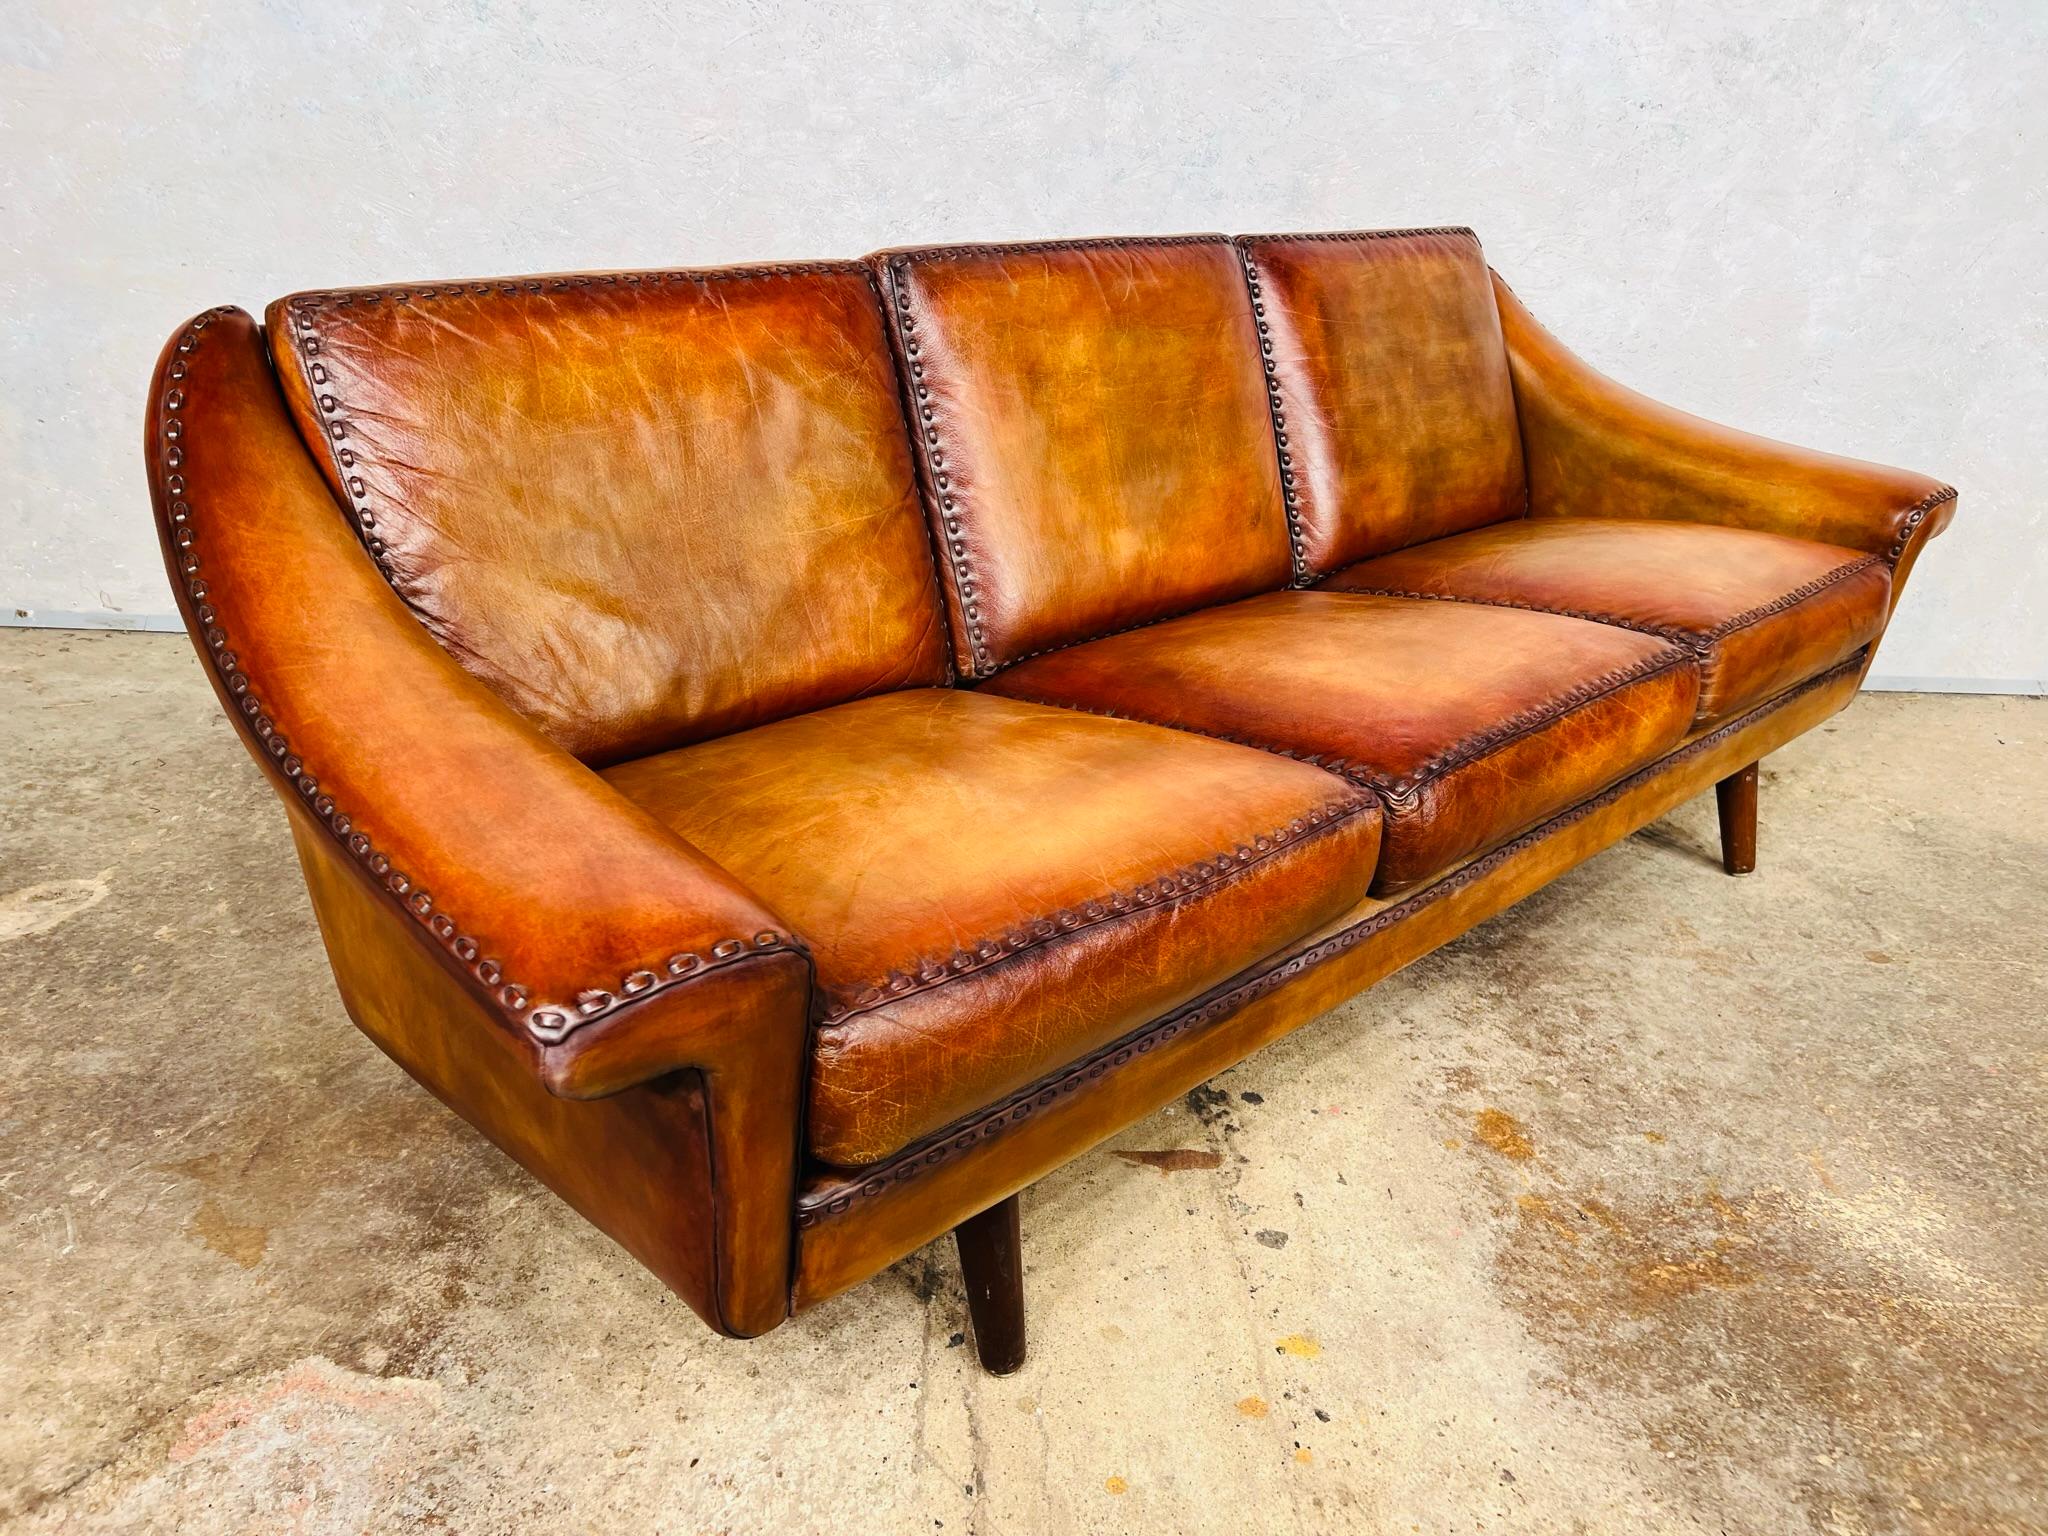 20th Century Matador Leather 3 Seater Sofa by Aage Christiansen for Eran 1960s #642 For Sale